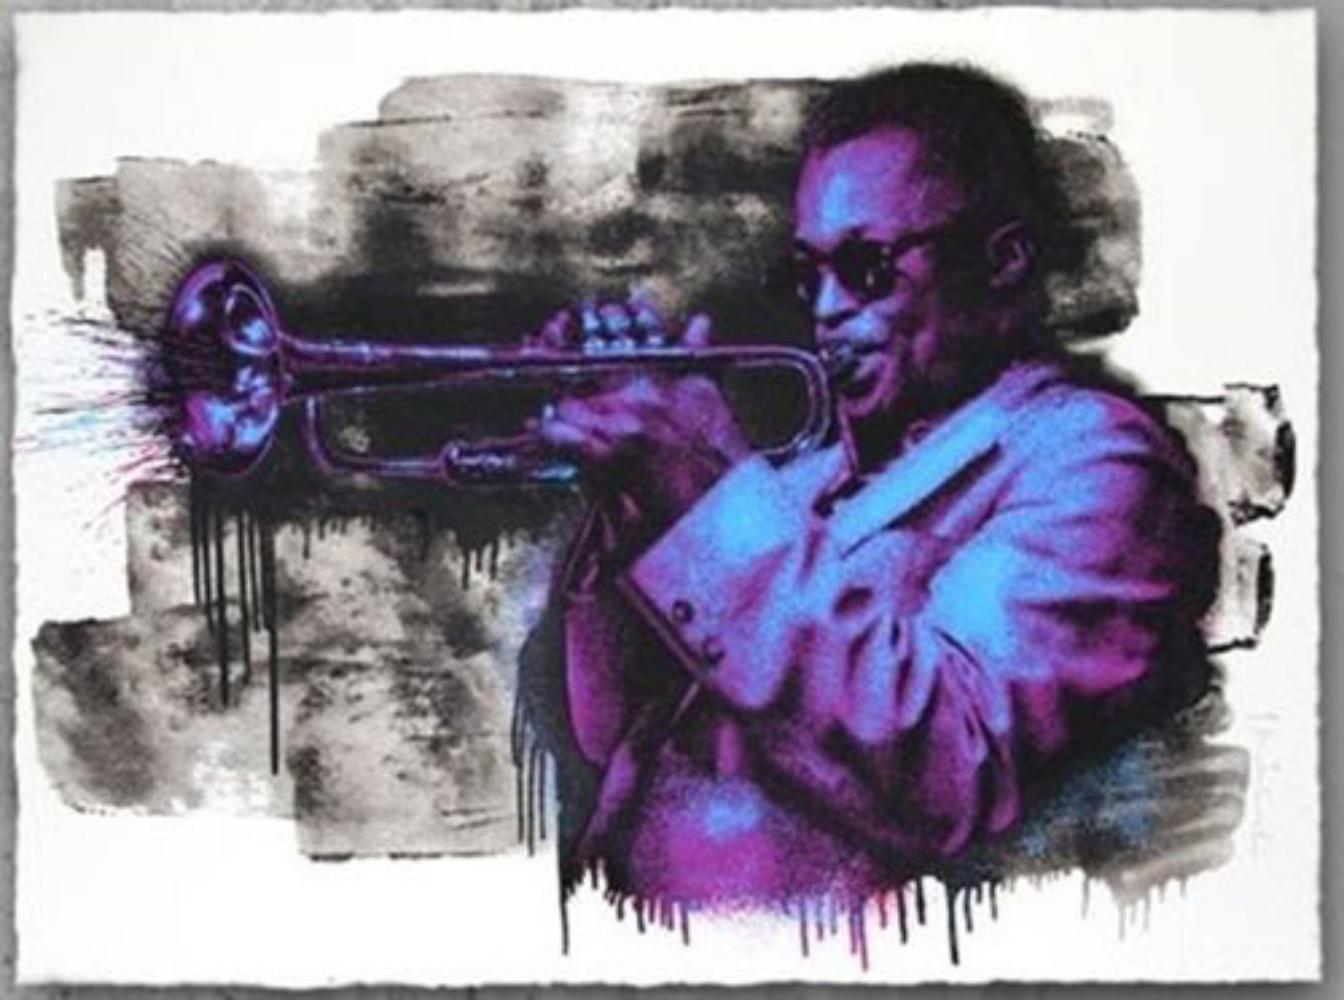 MR. BRAINWASH "MILES DAVIS (PURPLE/ORANGE)" SCREENPRINT ON HAND TORN ARCHIVAL ART PAPER SIZE: 30 X 22.5 INCHES EDITION: OF 50 YEAR: 2015 HAND SIGNED & NUMBERED ON FRONT WITH THUMBPRINT ON VERSO BY THE ARTIST.

Mr. Brainwash. French. Born Thierry